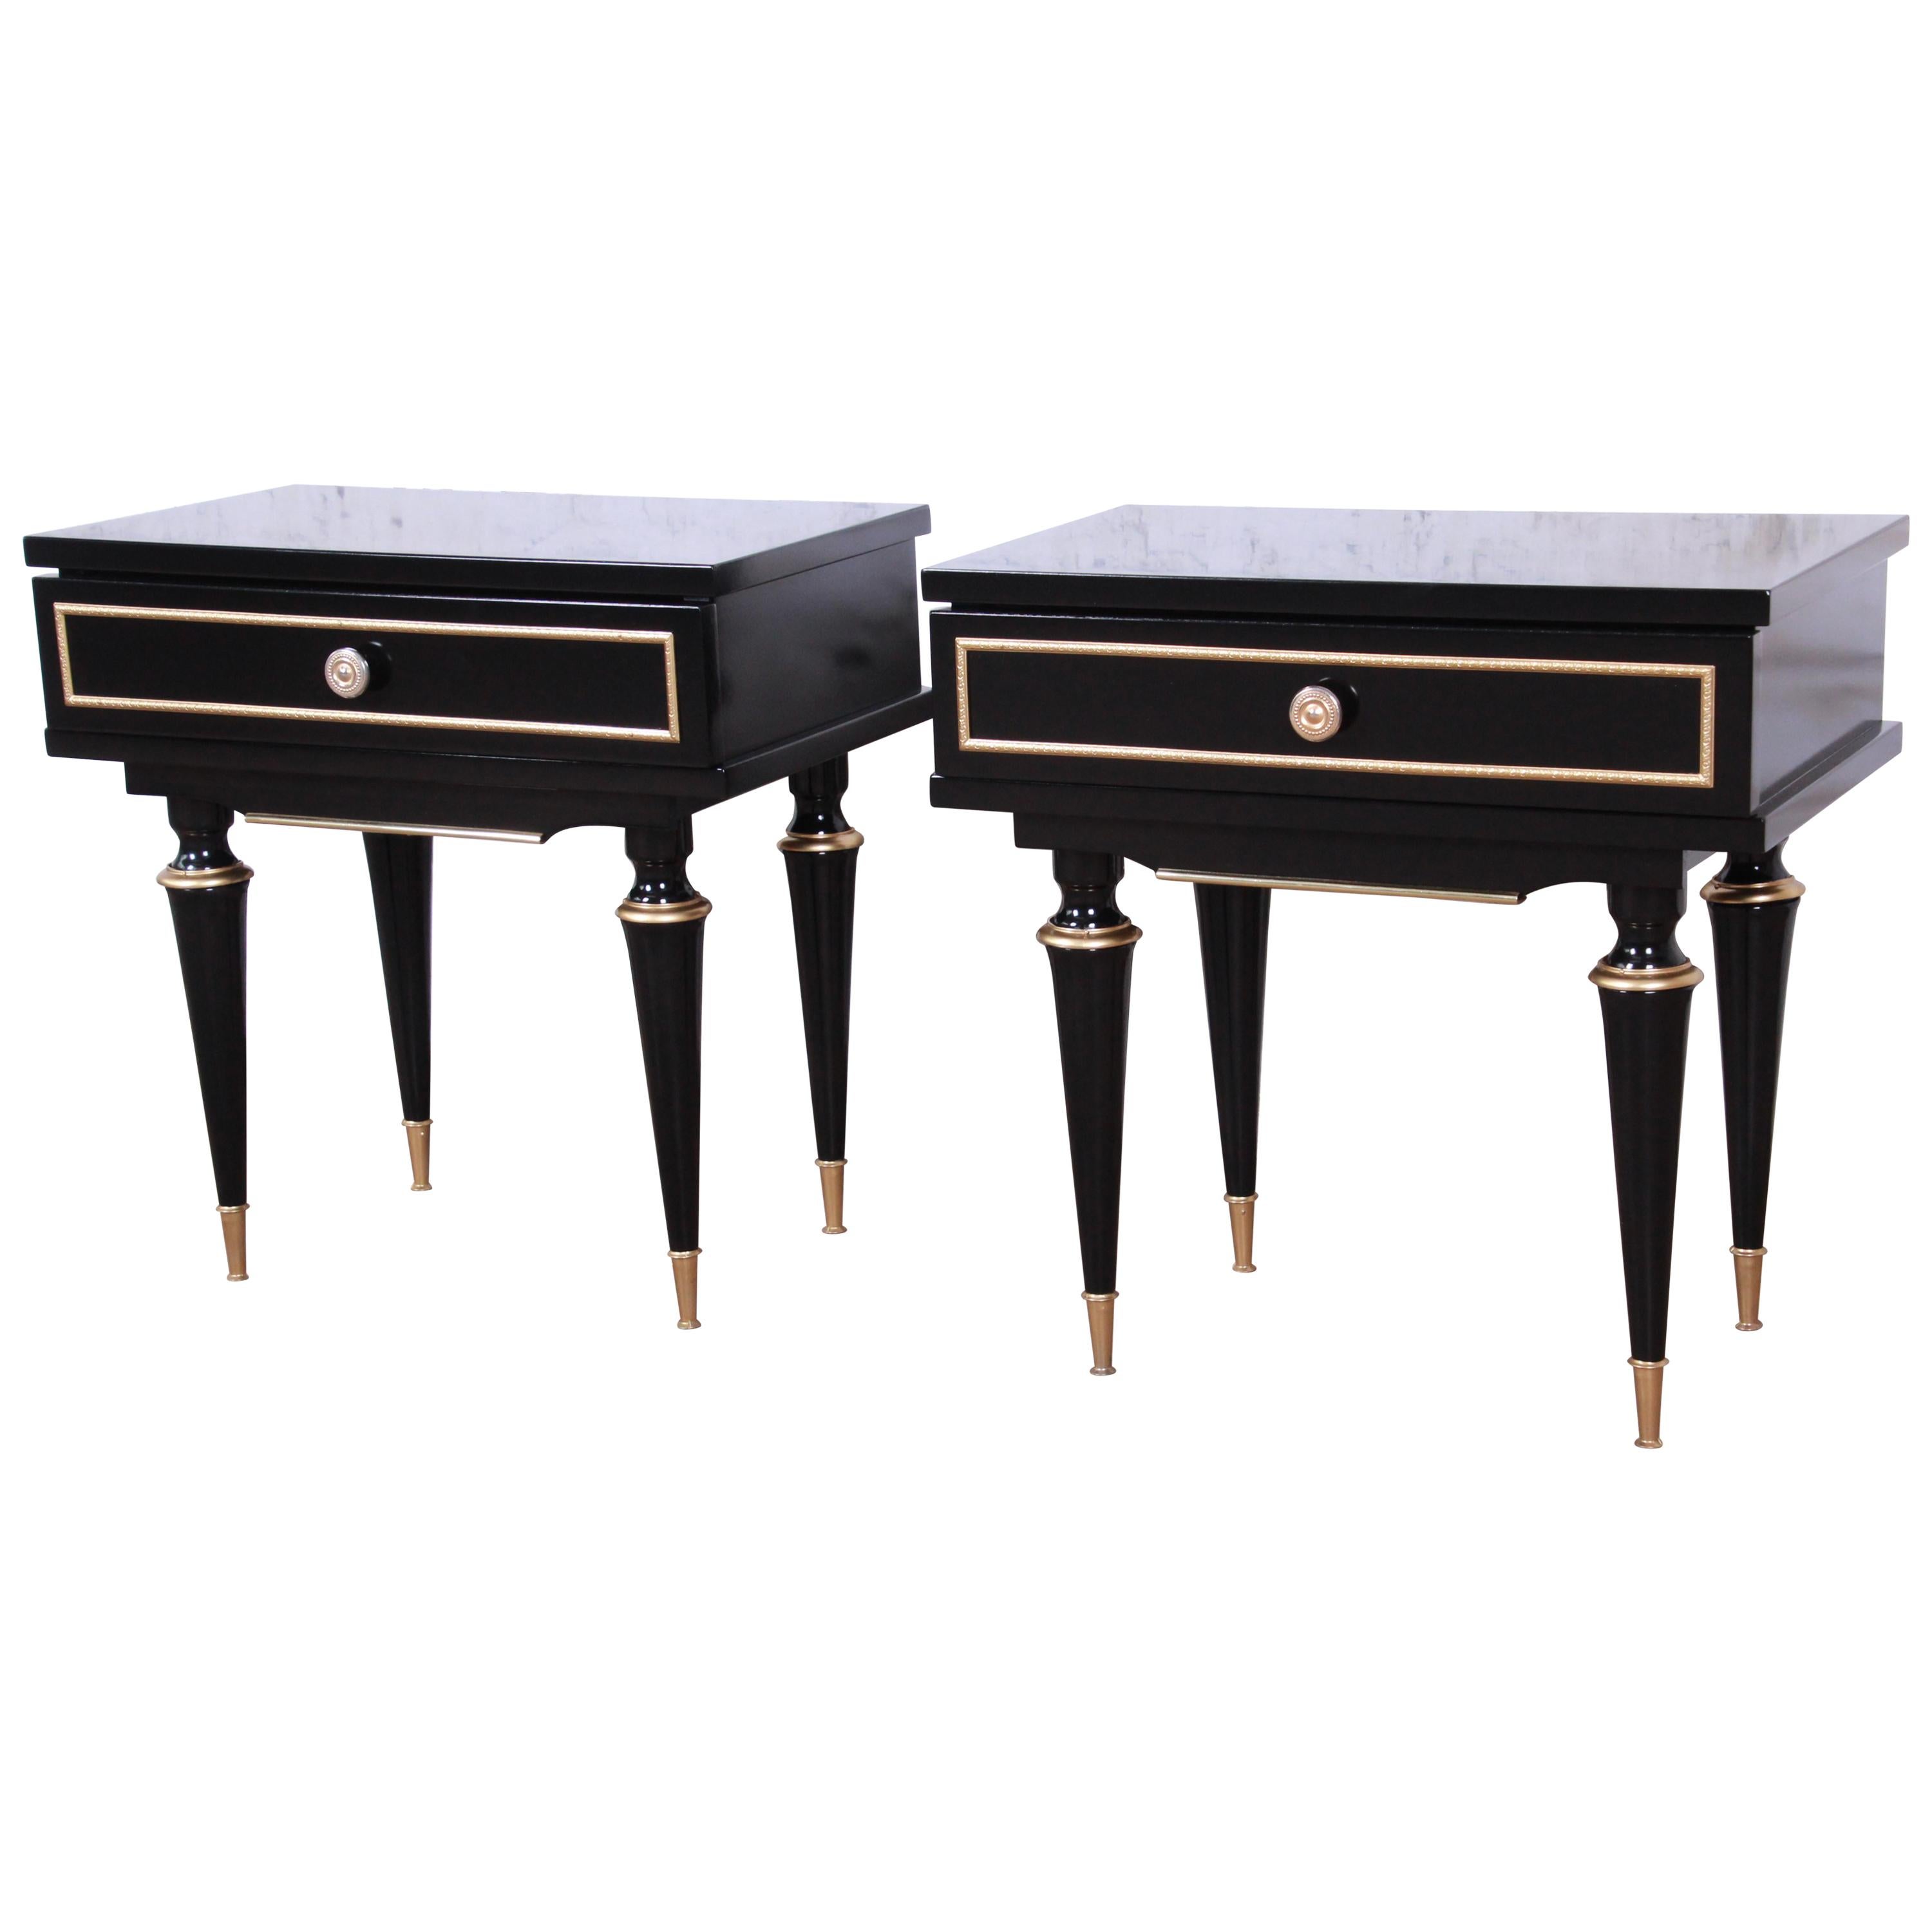 French Midcentury Ebonized Wood and Brass Nightstands or End Tables, Pair